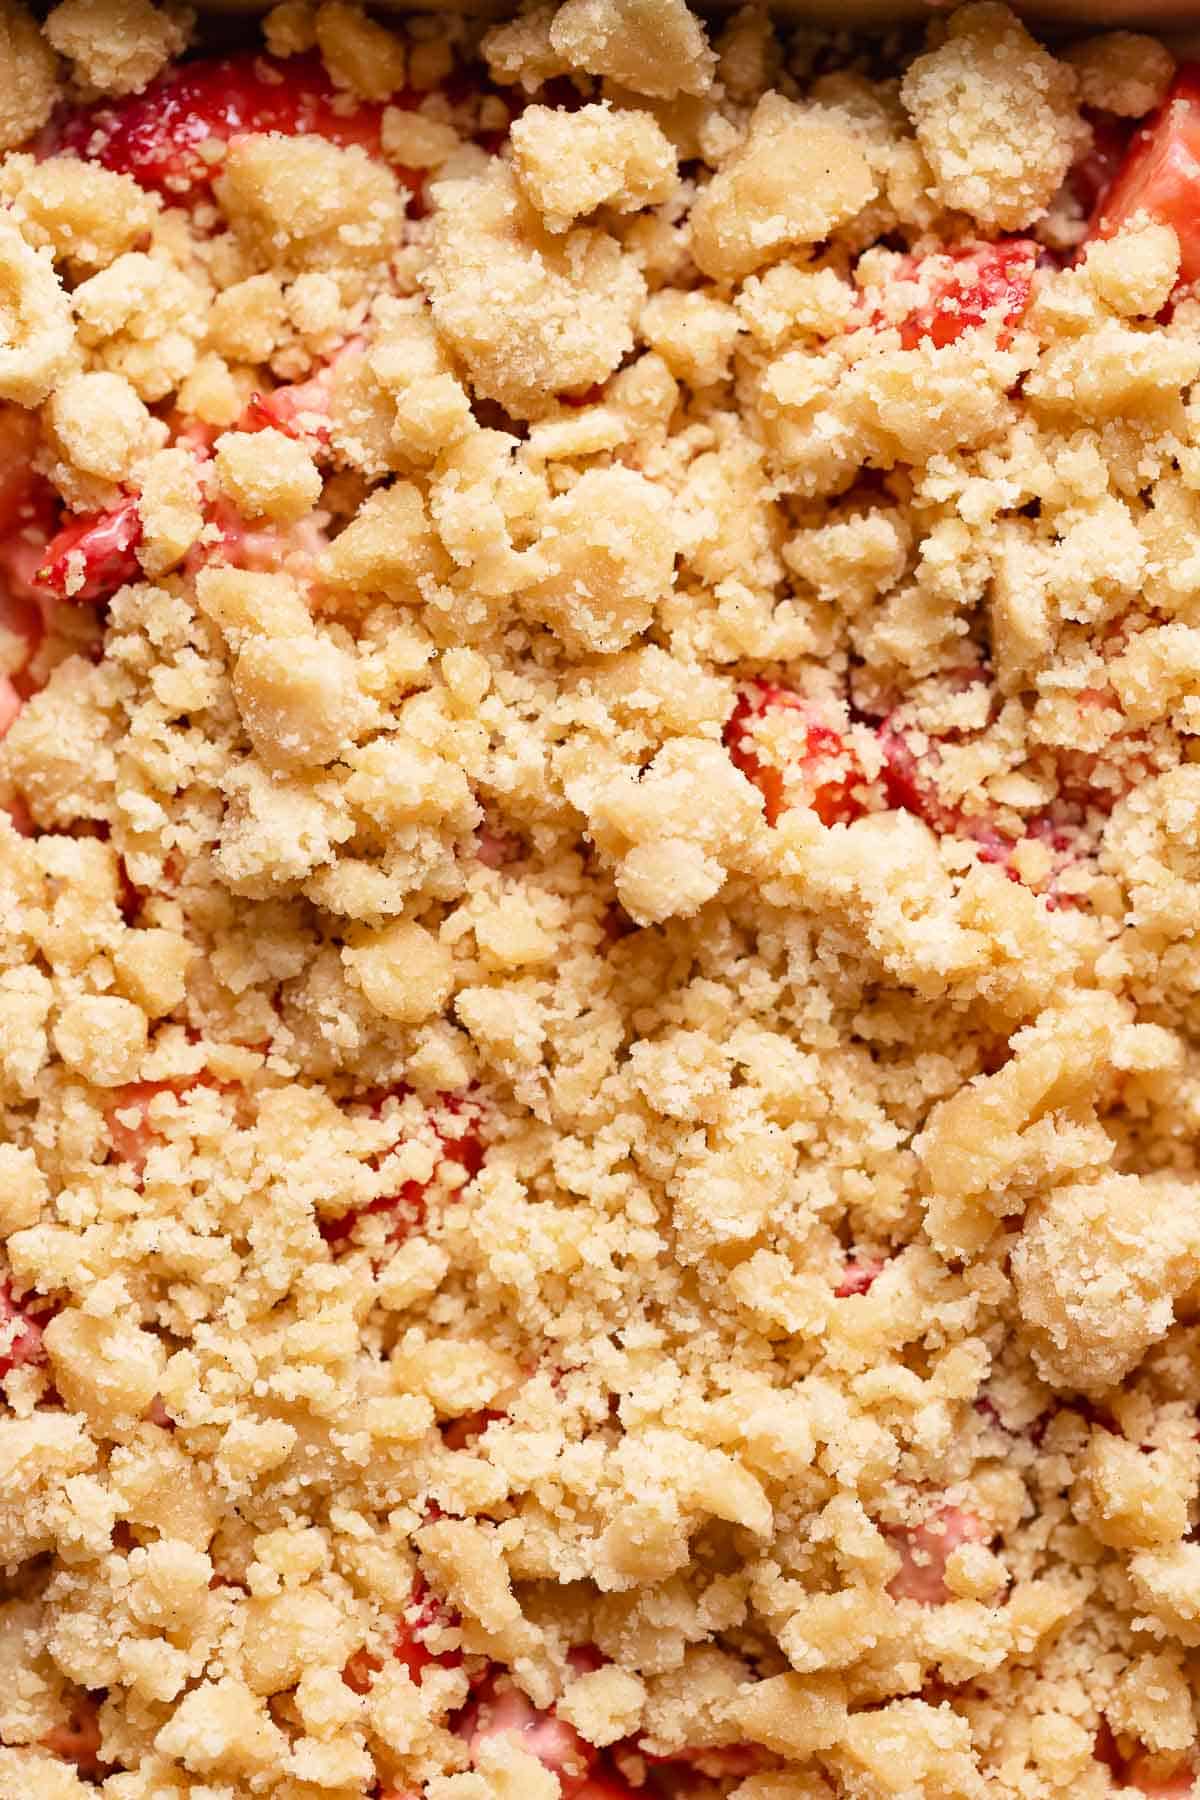 A close up shot of the crumb topping on top of the strawberries.